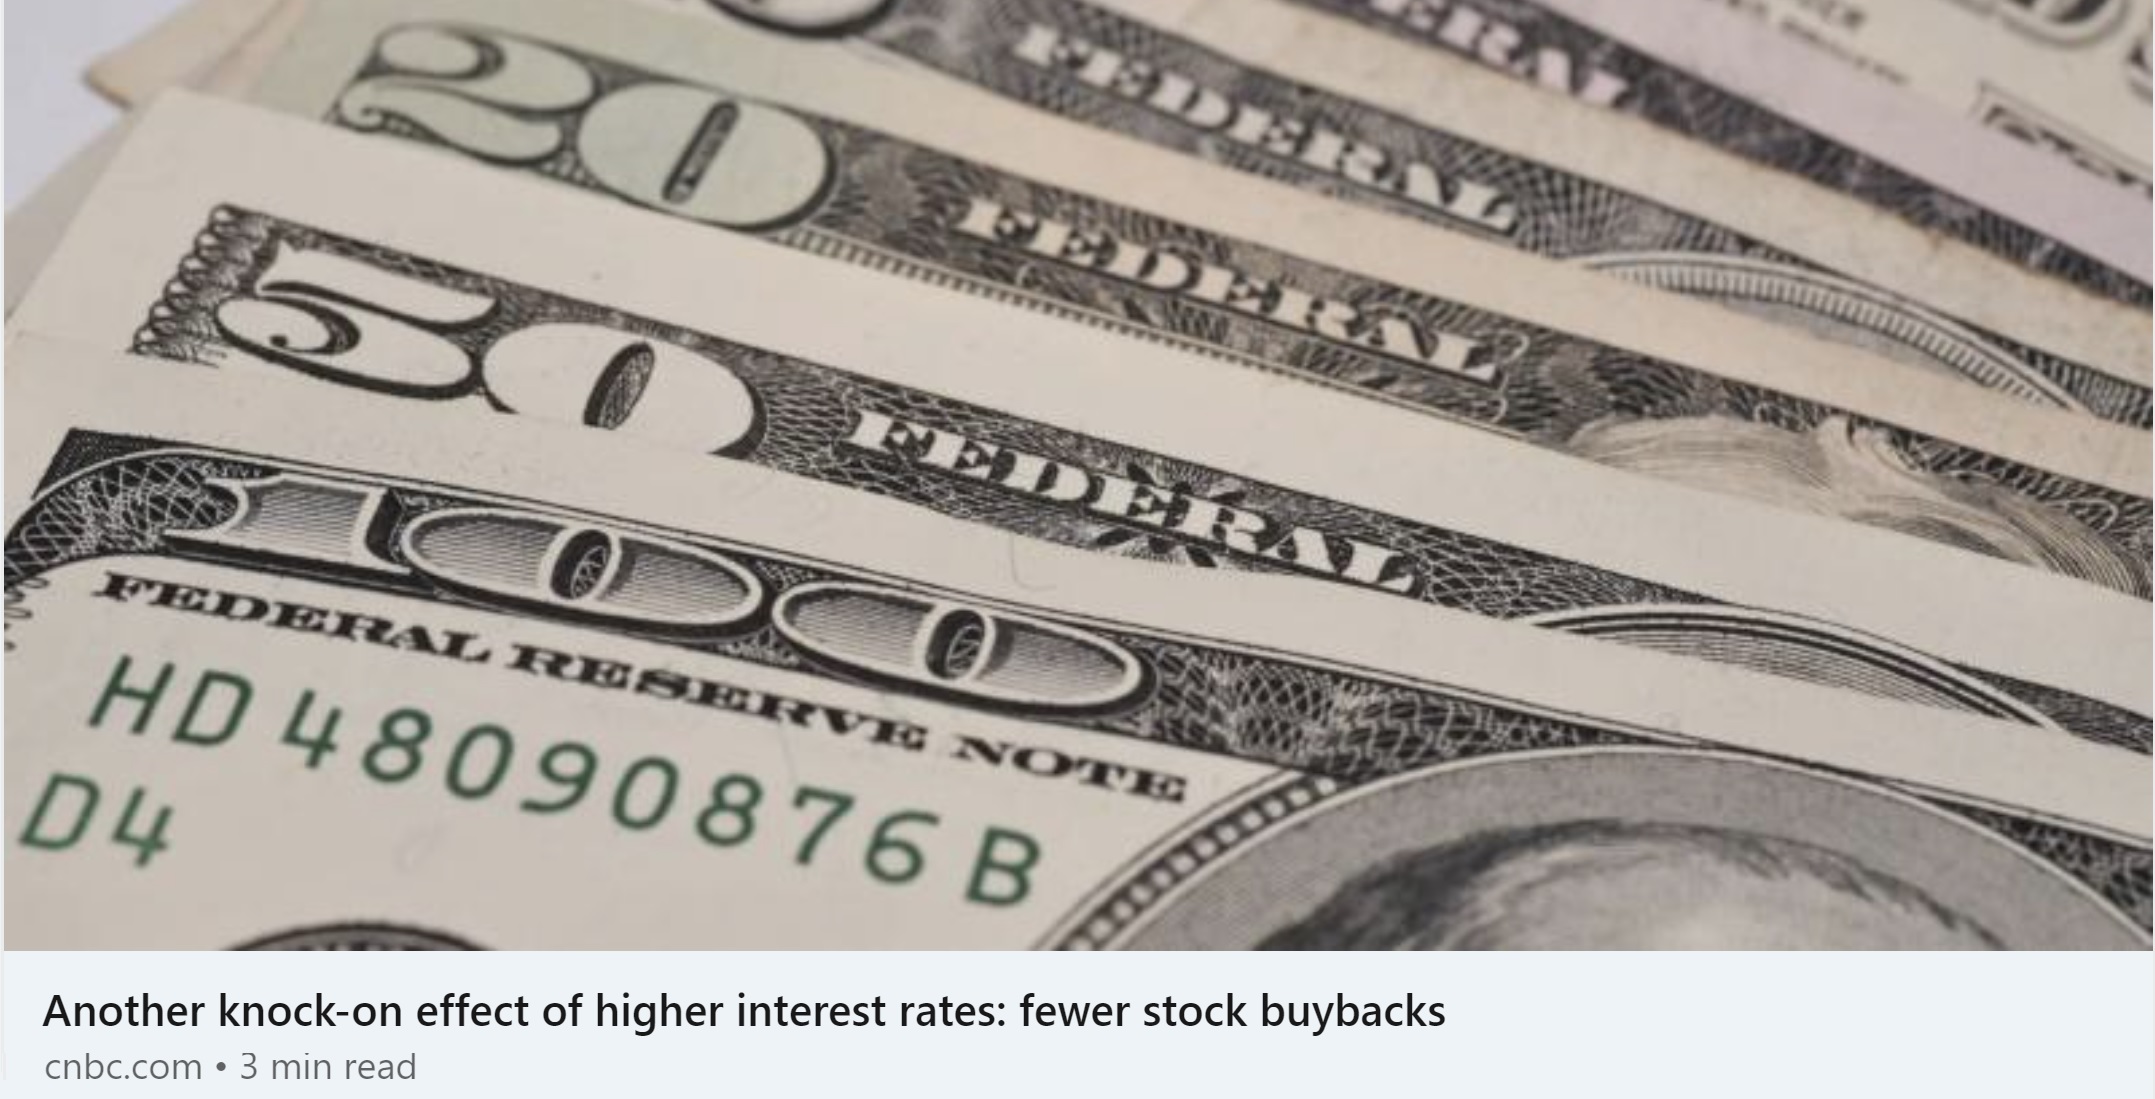 Fewer Stock Buybacks: An Effect of Higher Interest Rates